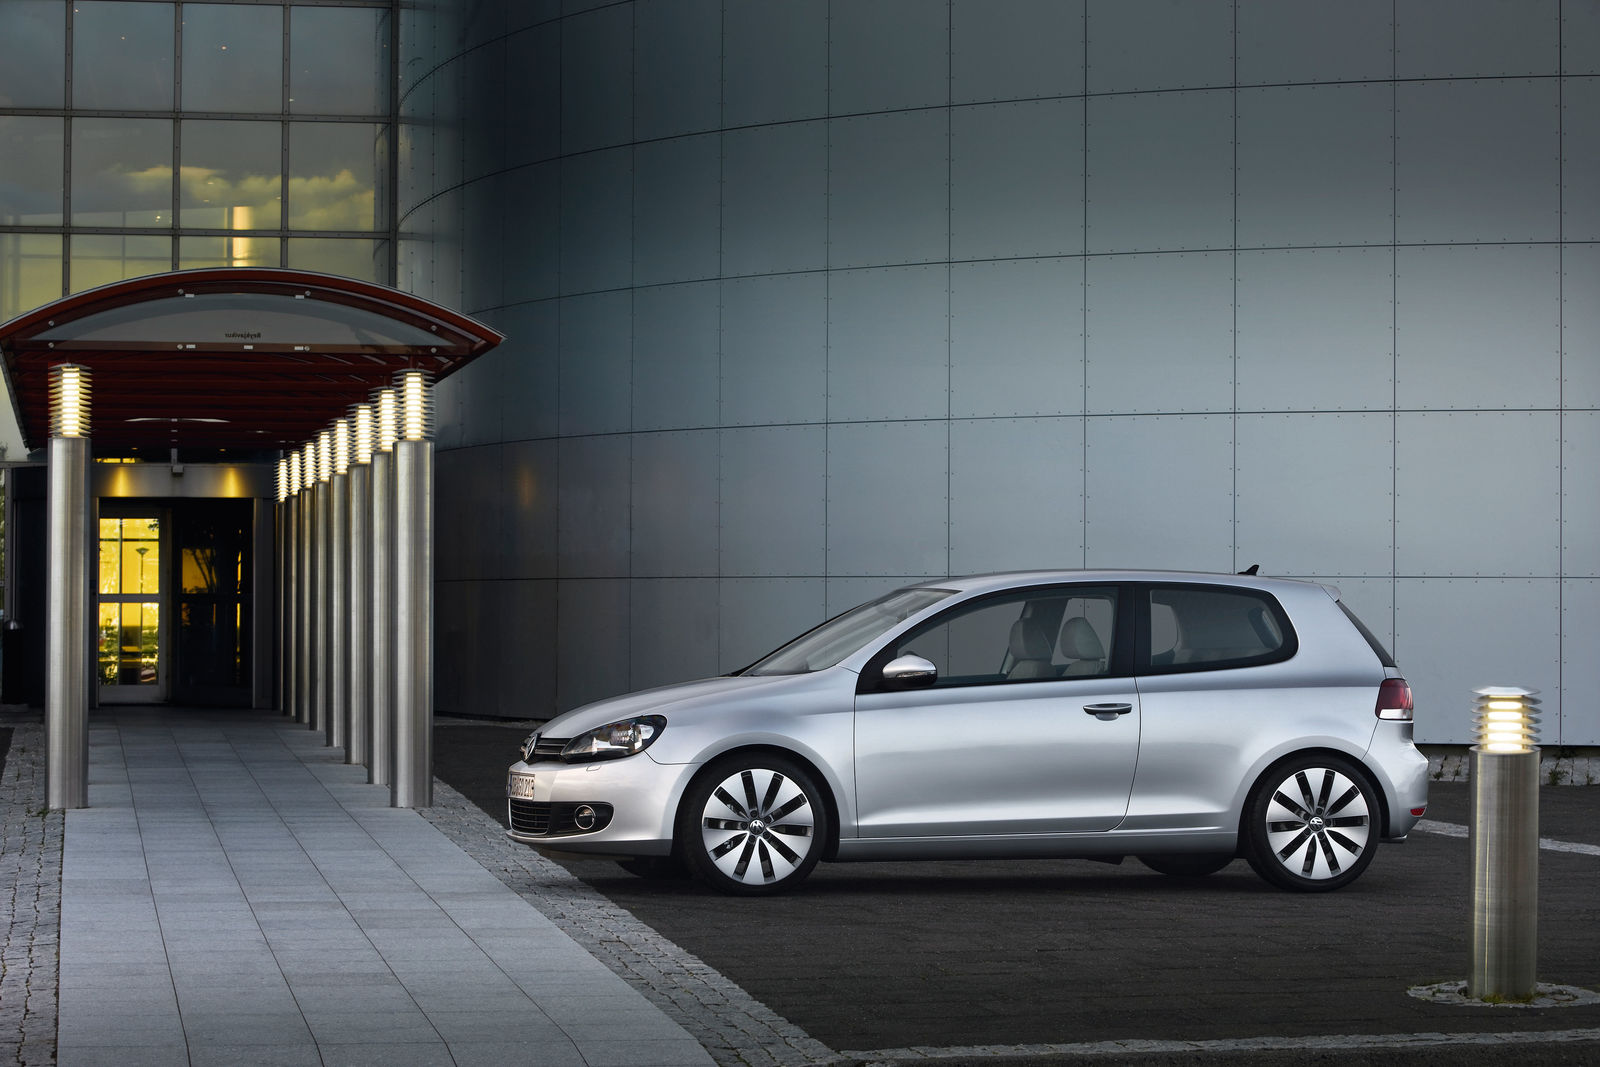 High-end in the compact format: Golf VI – 2008 to 2012